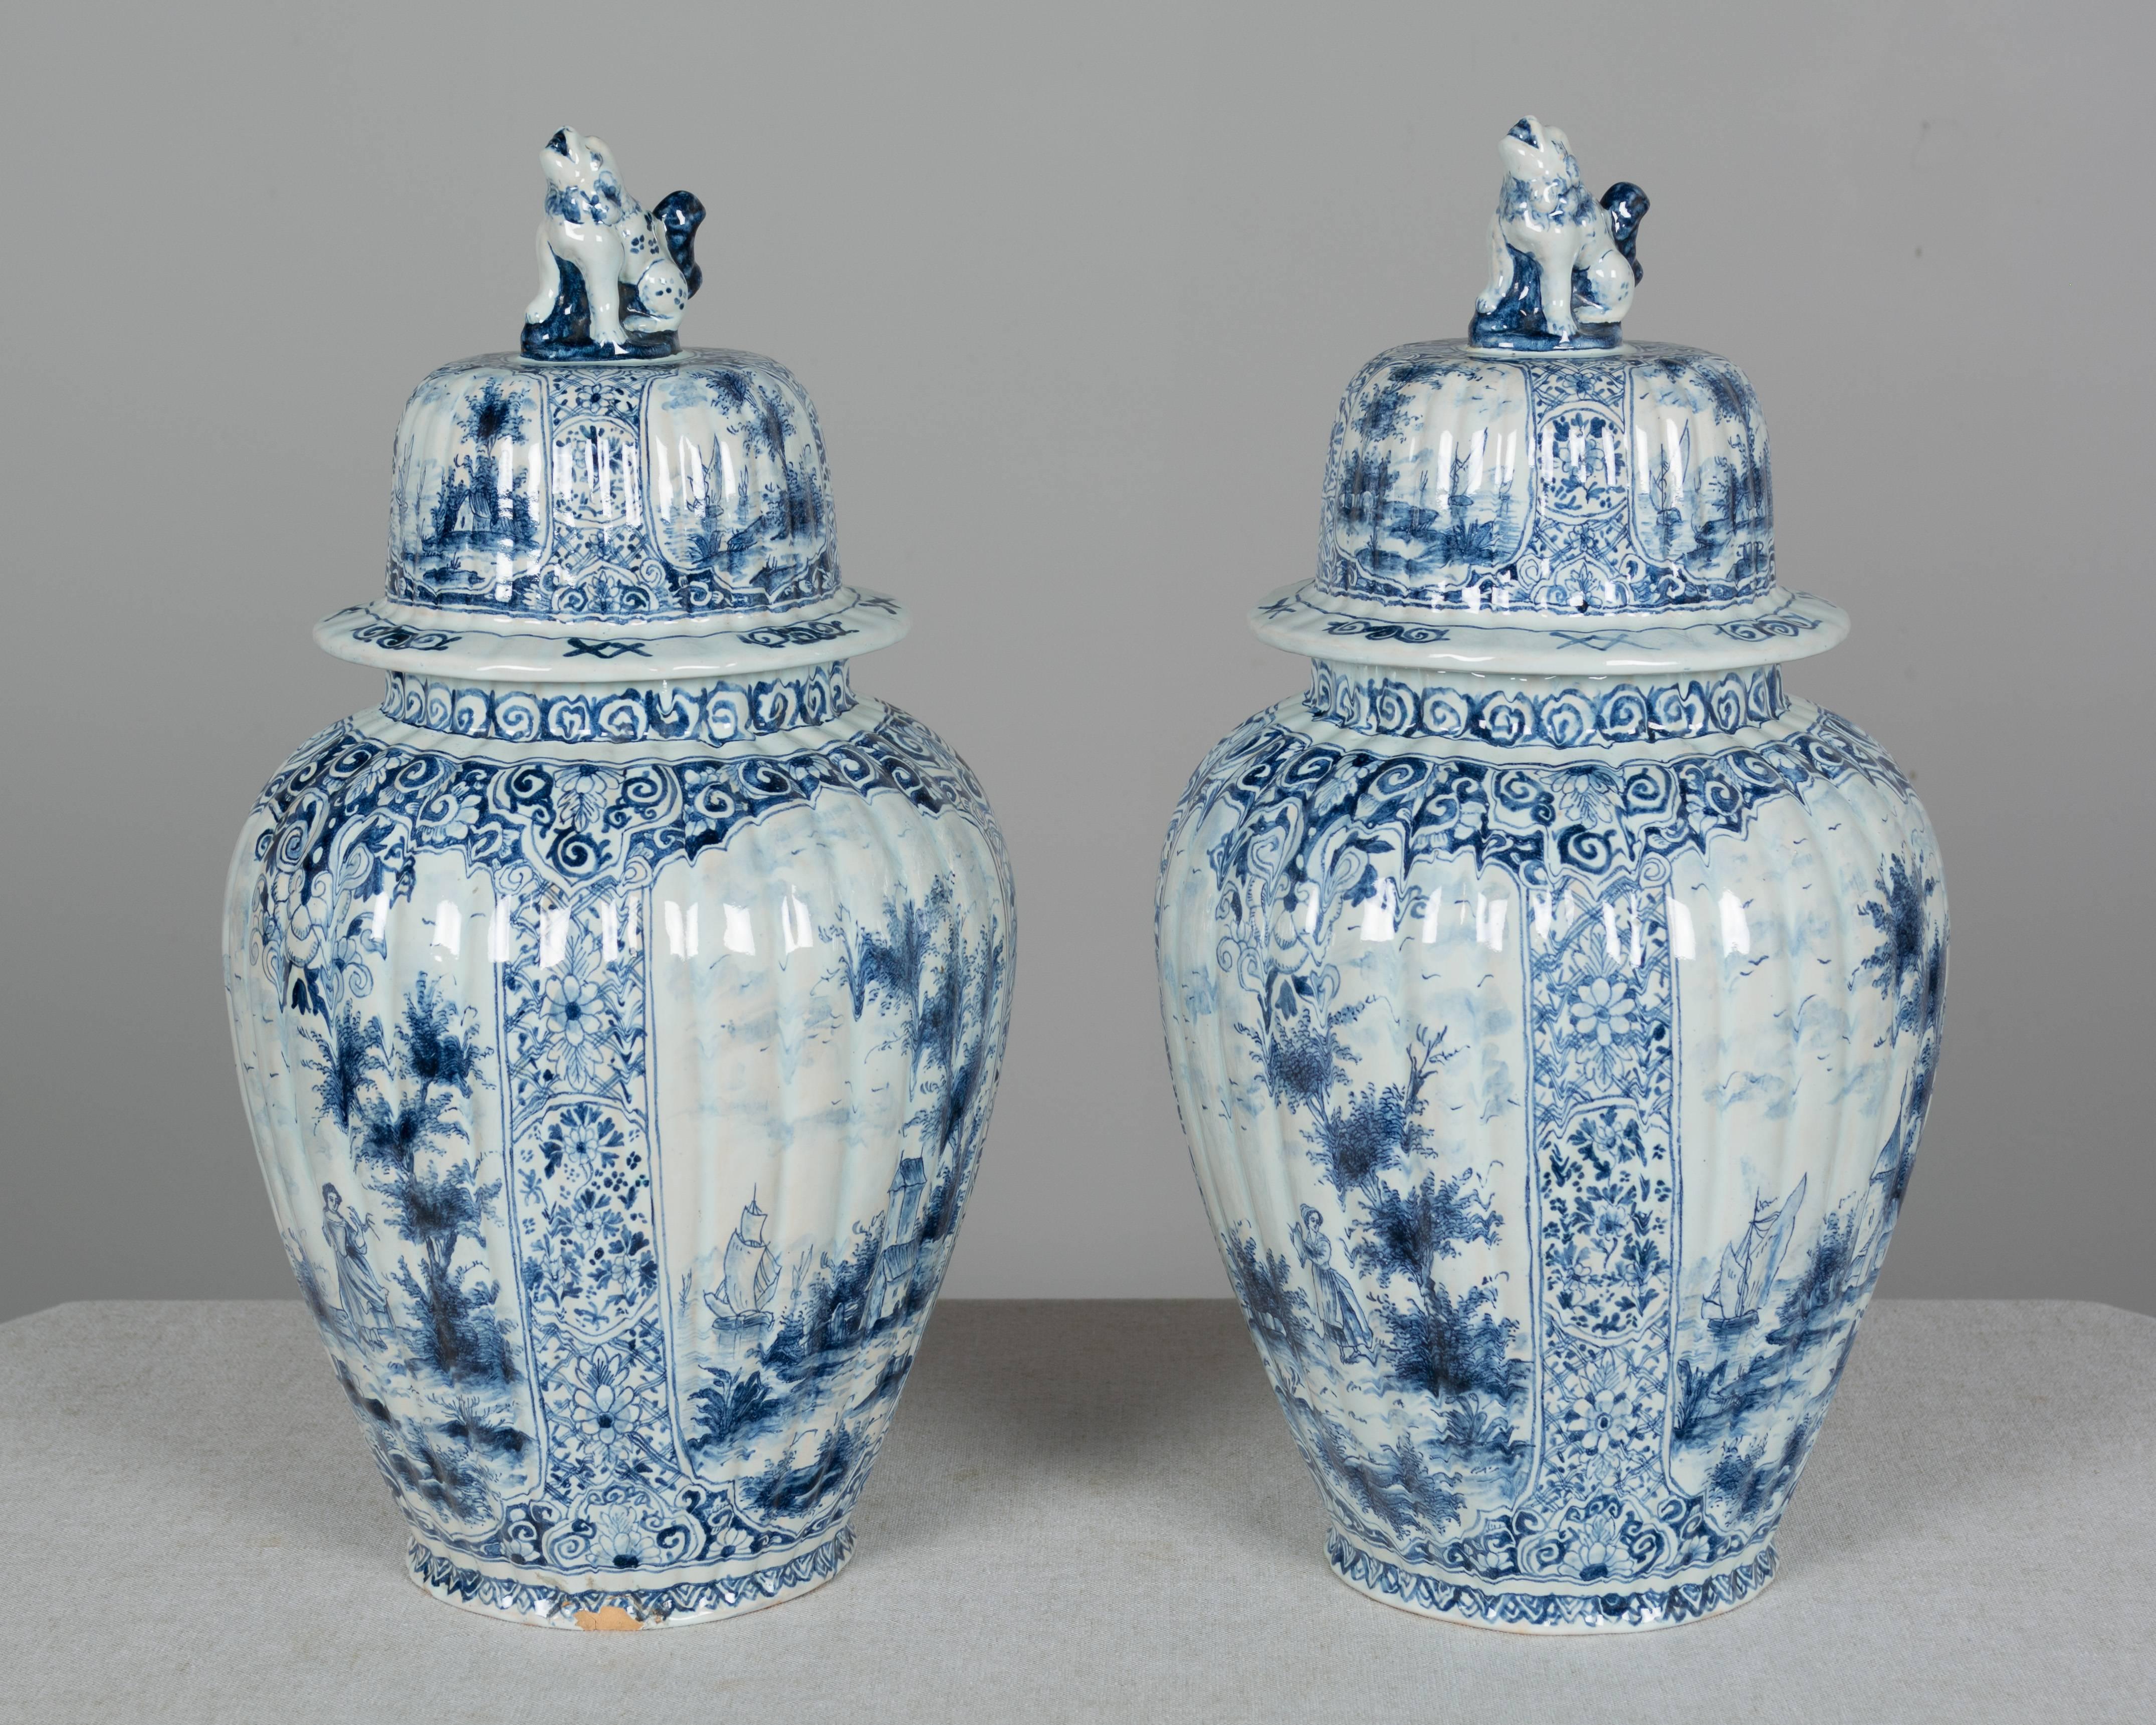 20th Century Pair of Delft Faience Urns